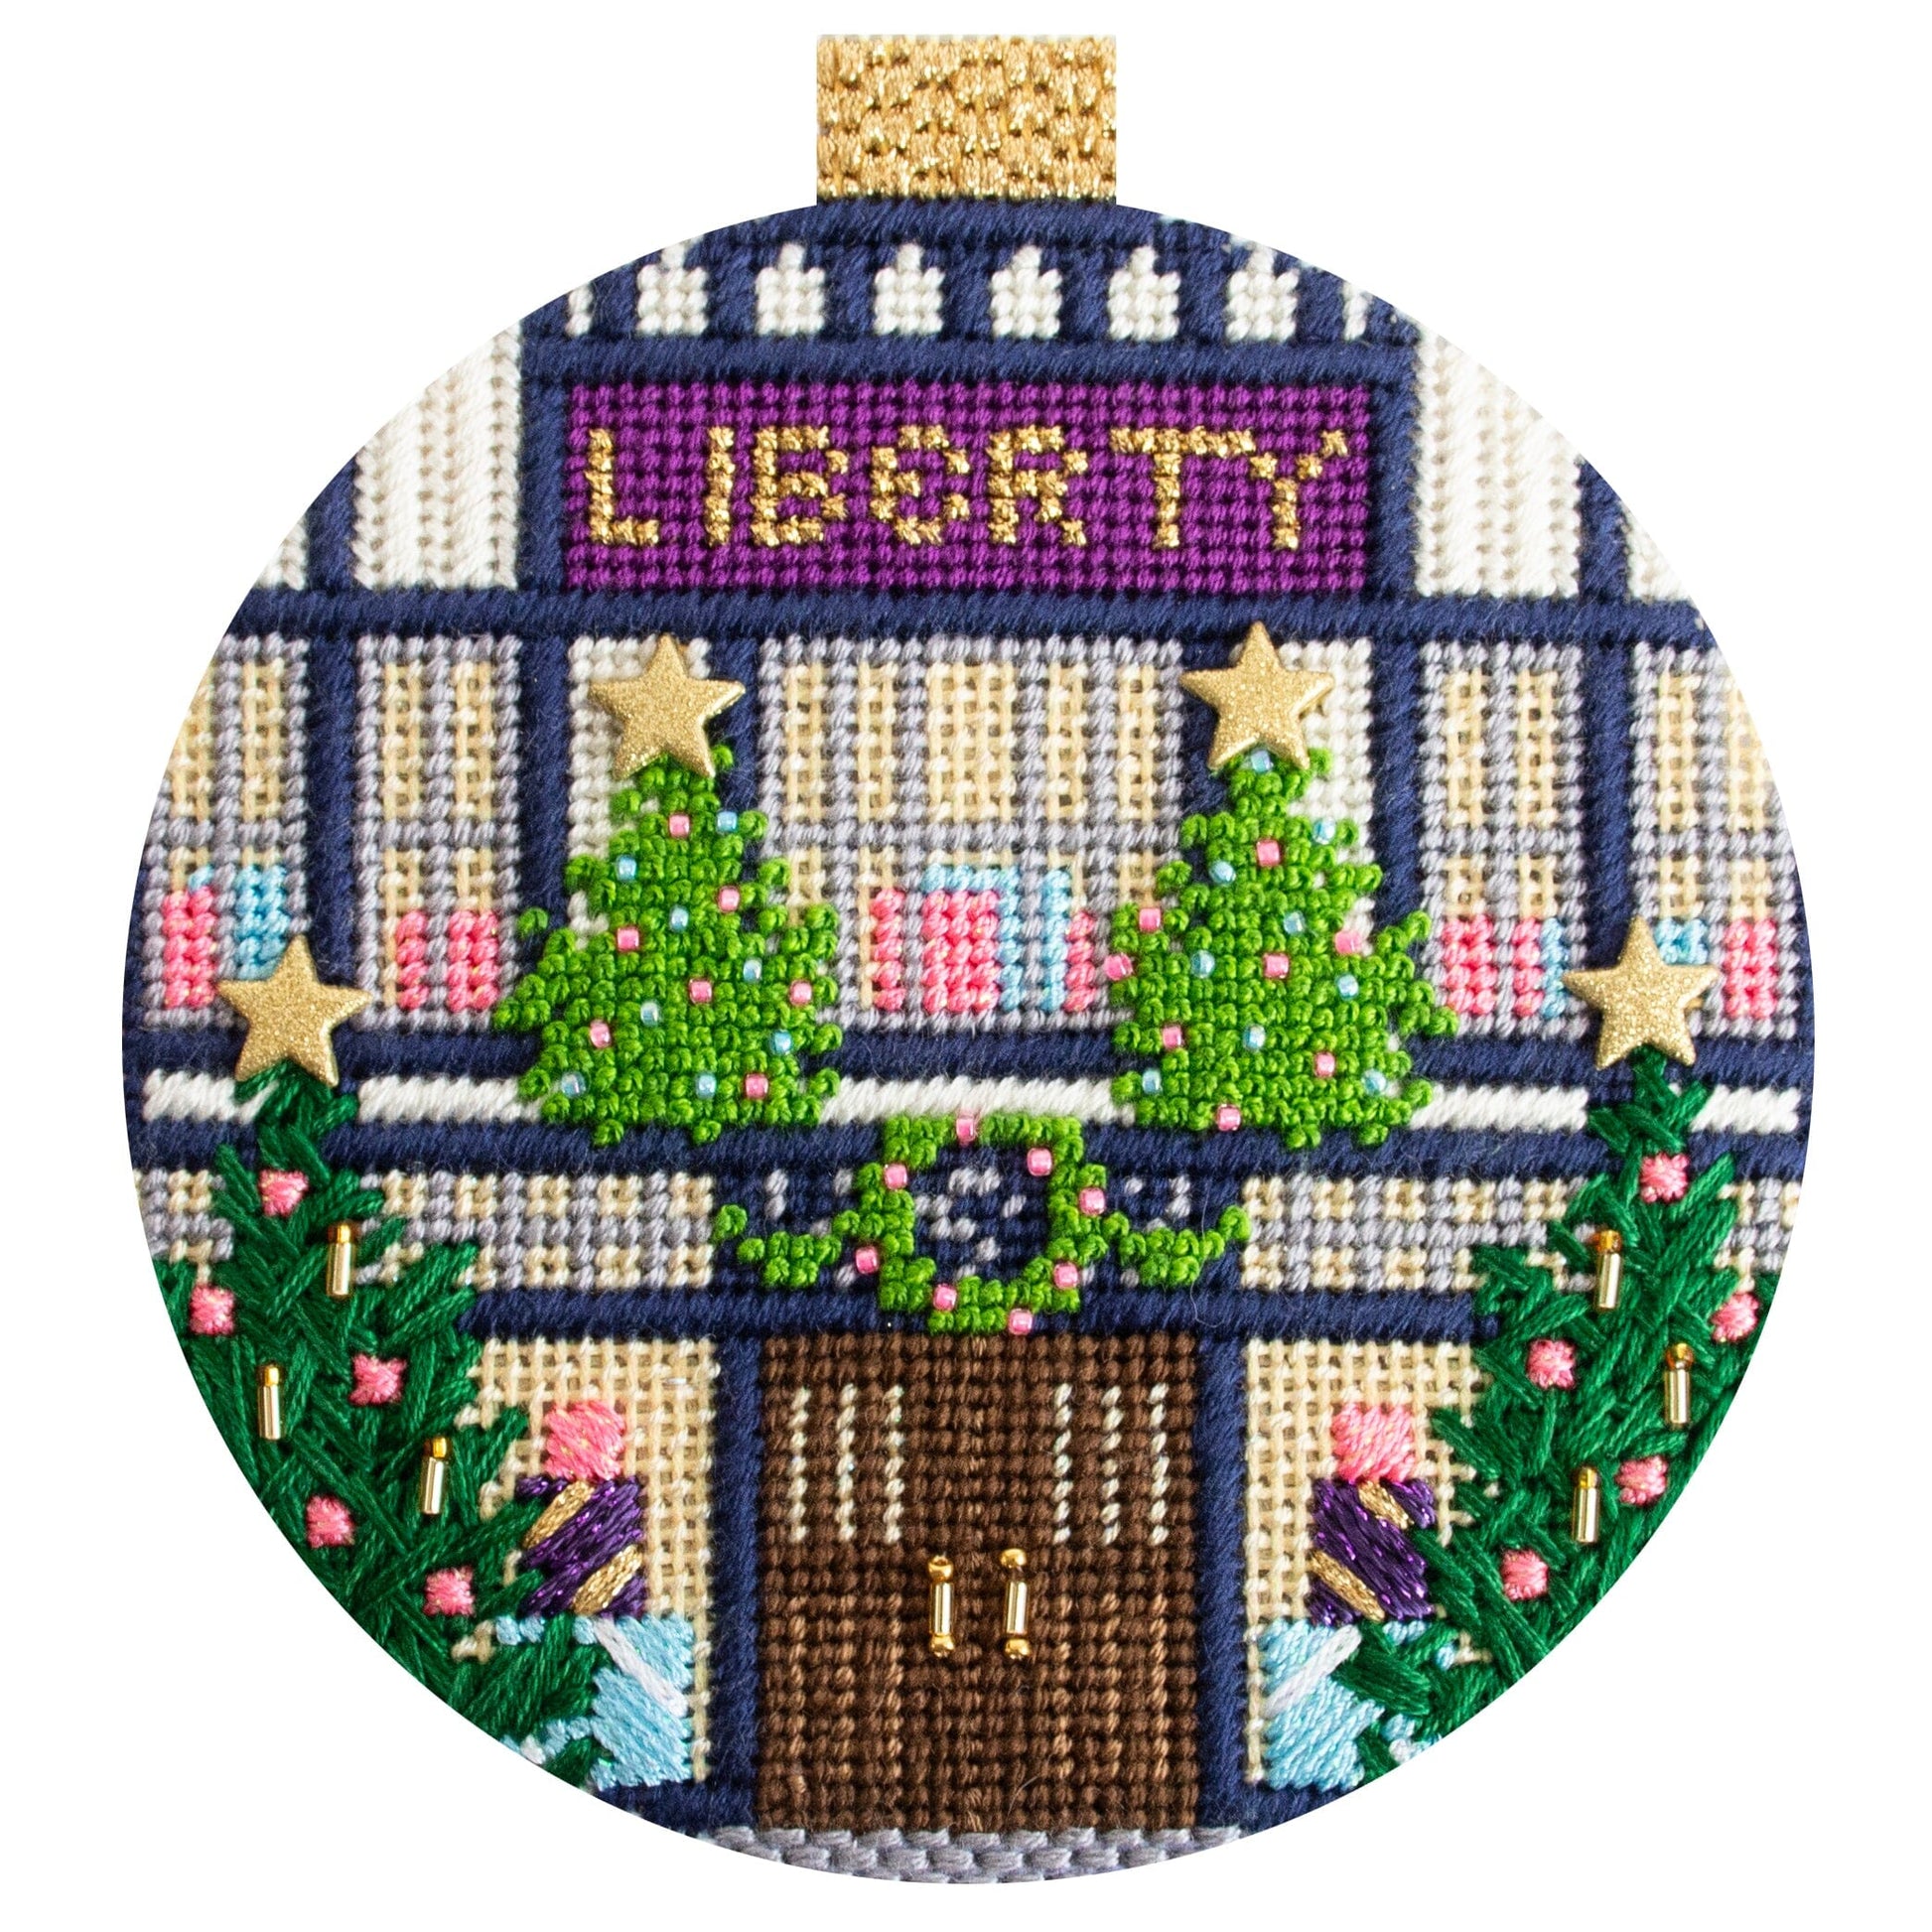 London Store Fronts- Liberty Printed Canvas Needlepoint To Go 